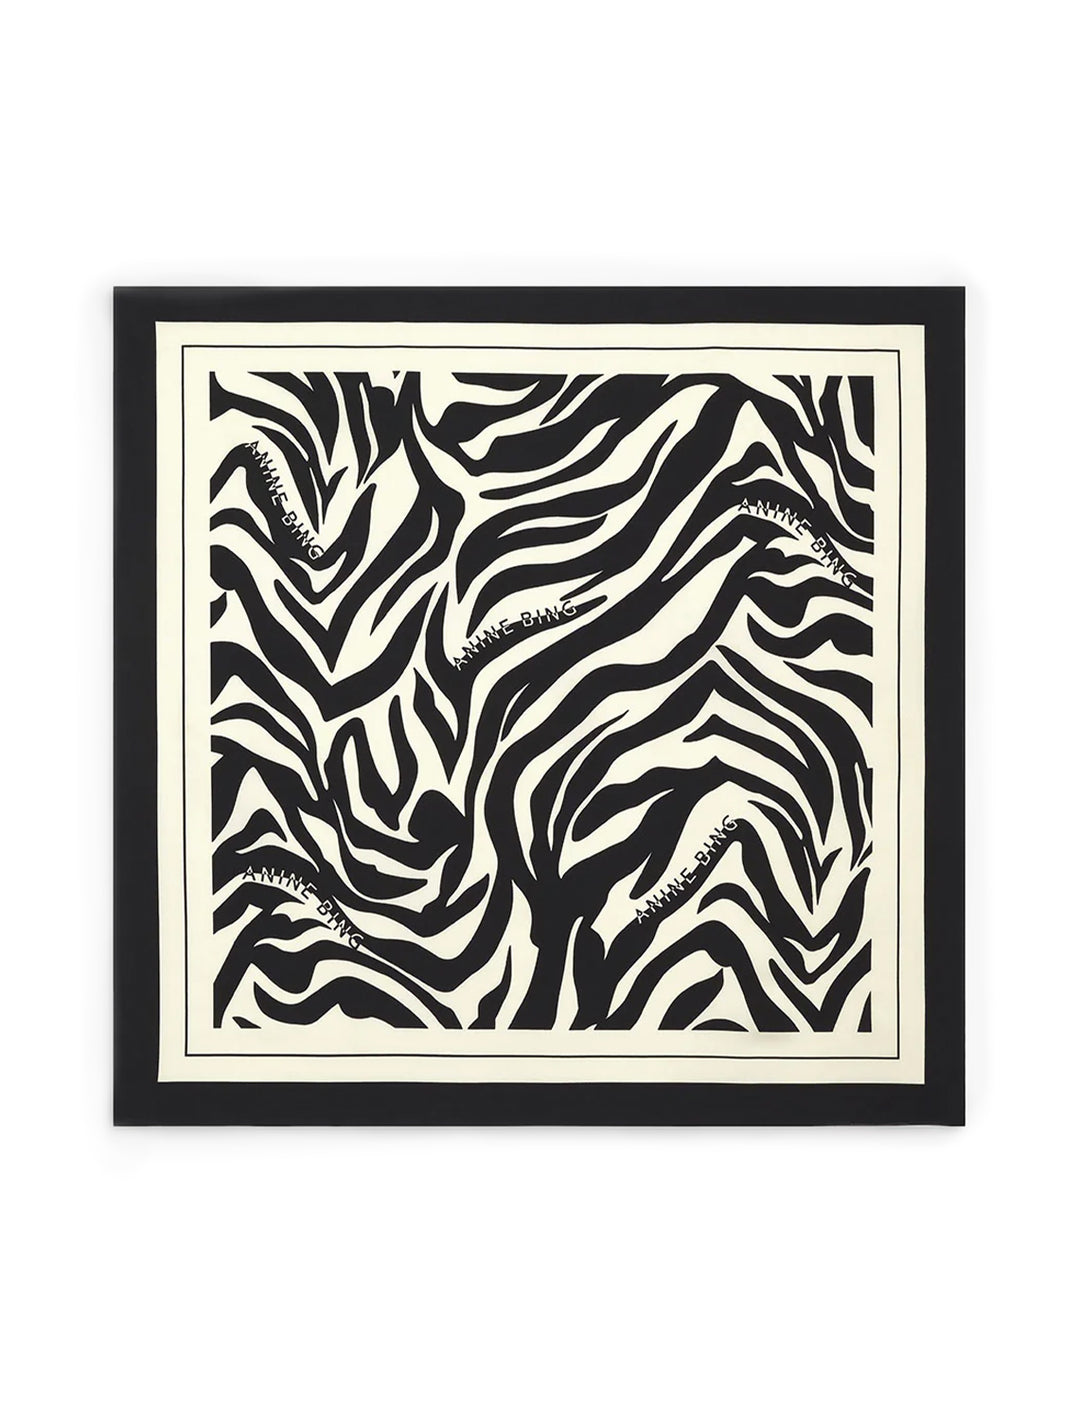 Overhead view of Anine Bing's evelyn scarf | black and cream zebra.